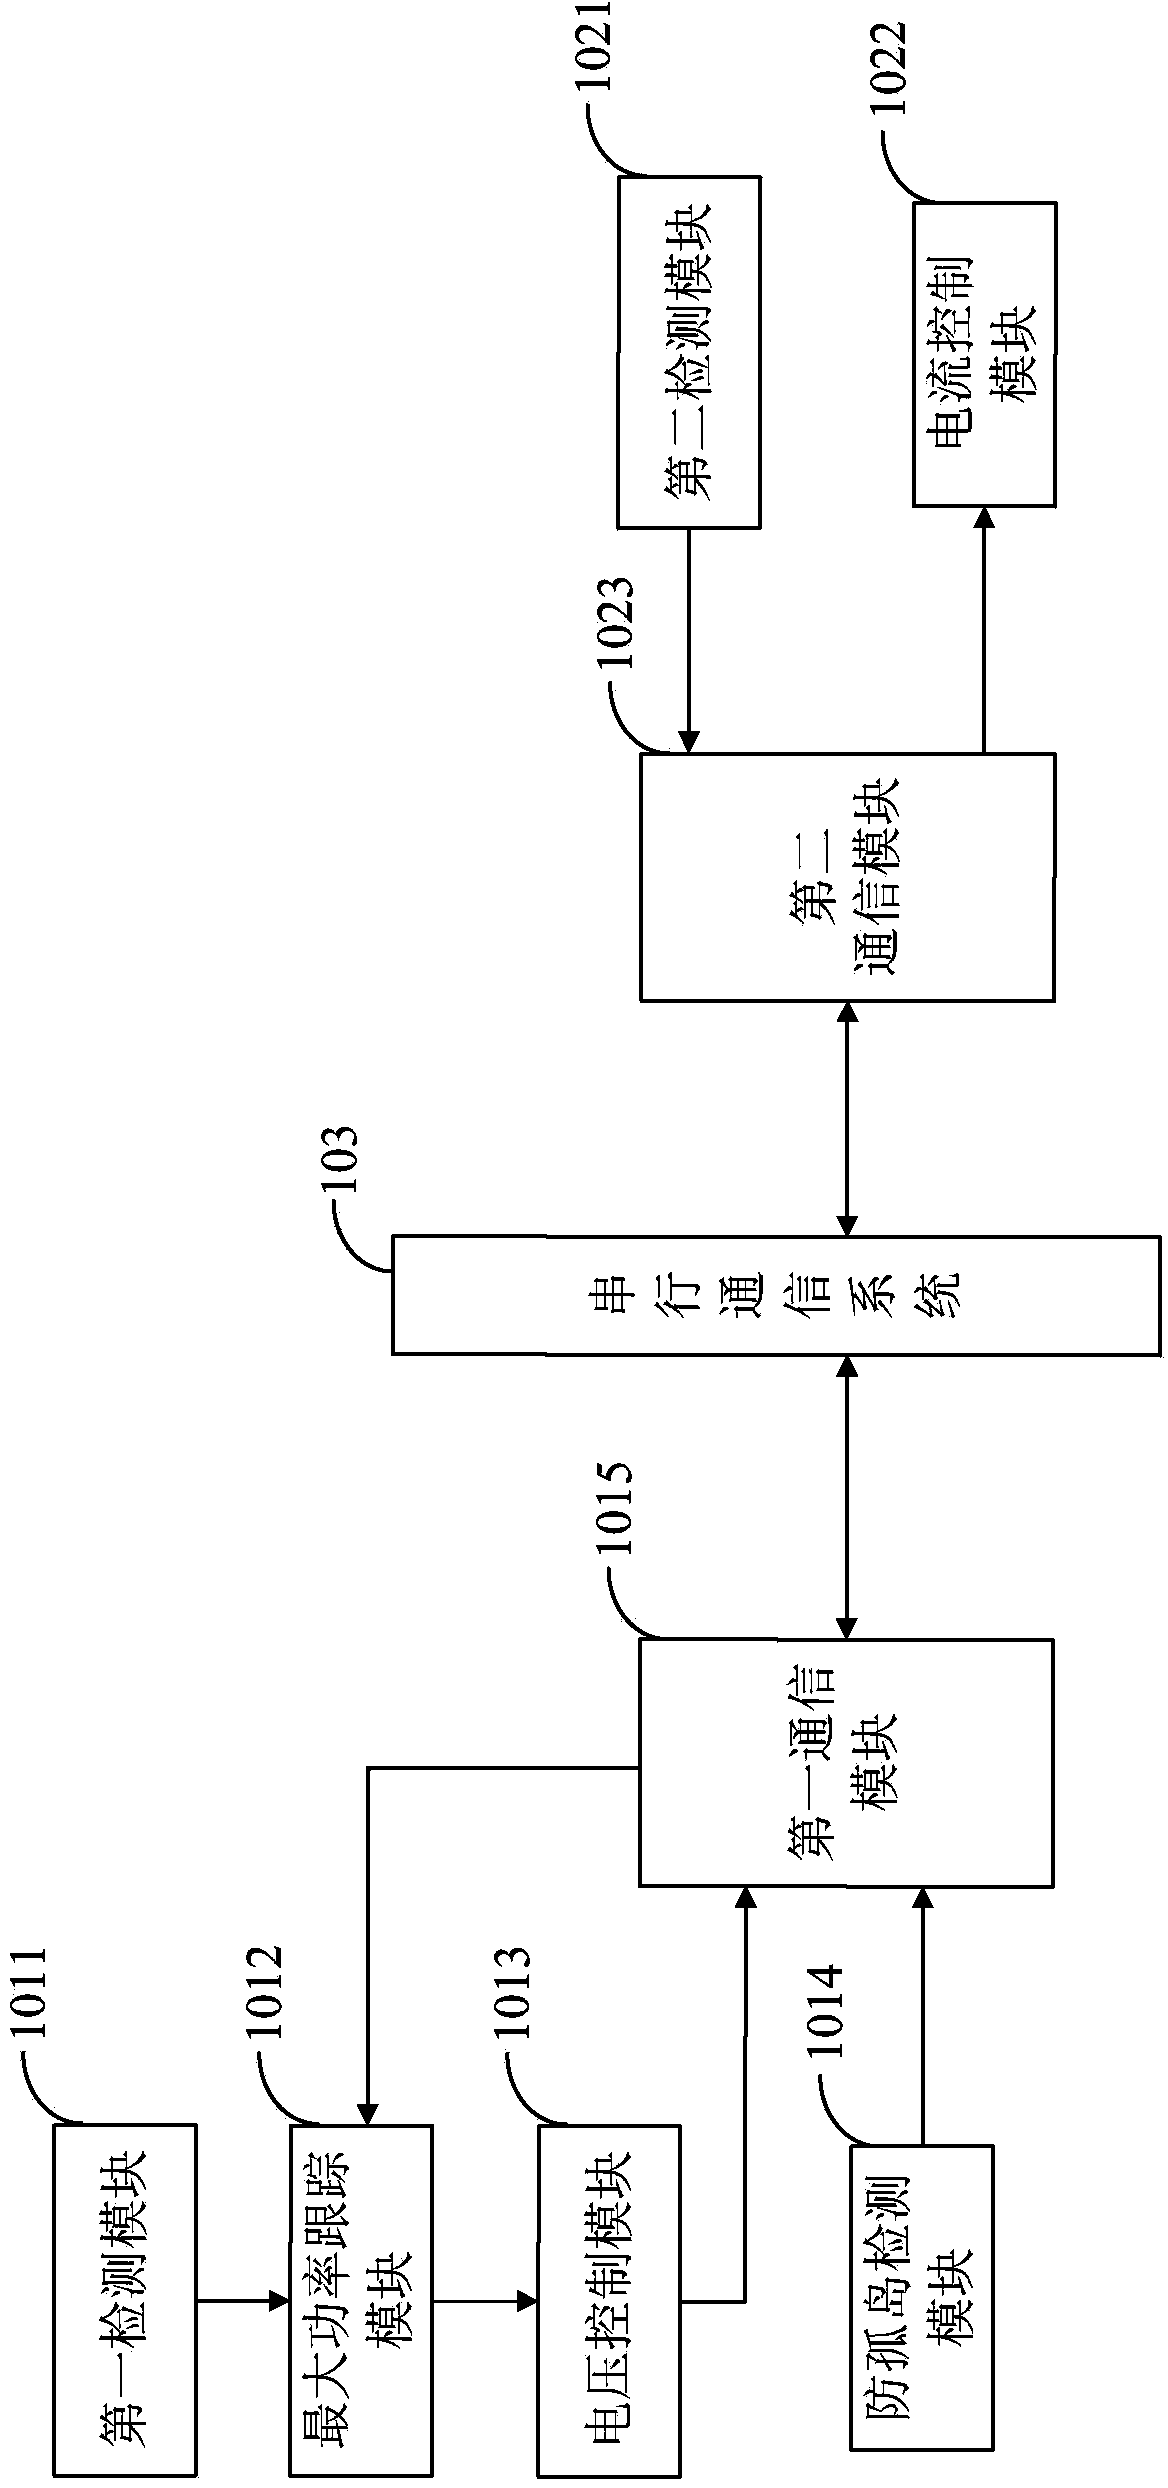 Parallel control system and method of modularized photovoltaic grid-connected inverter